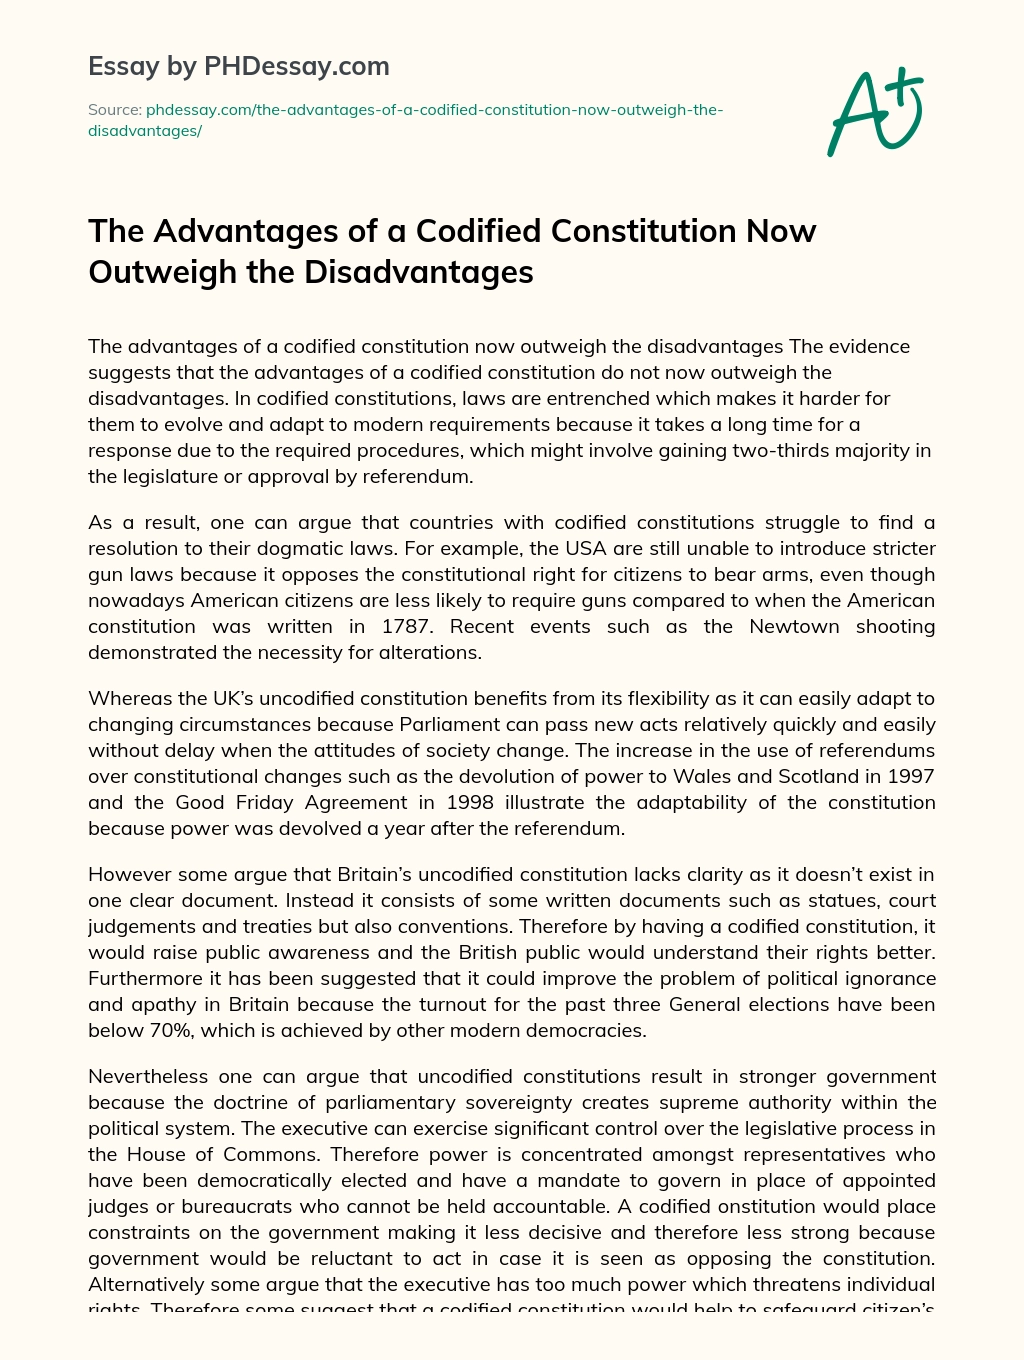 The Advantages of a Codified Constitution Now Outweigh the Disadvantages essay